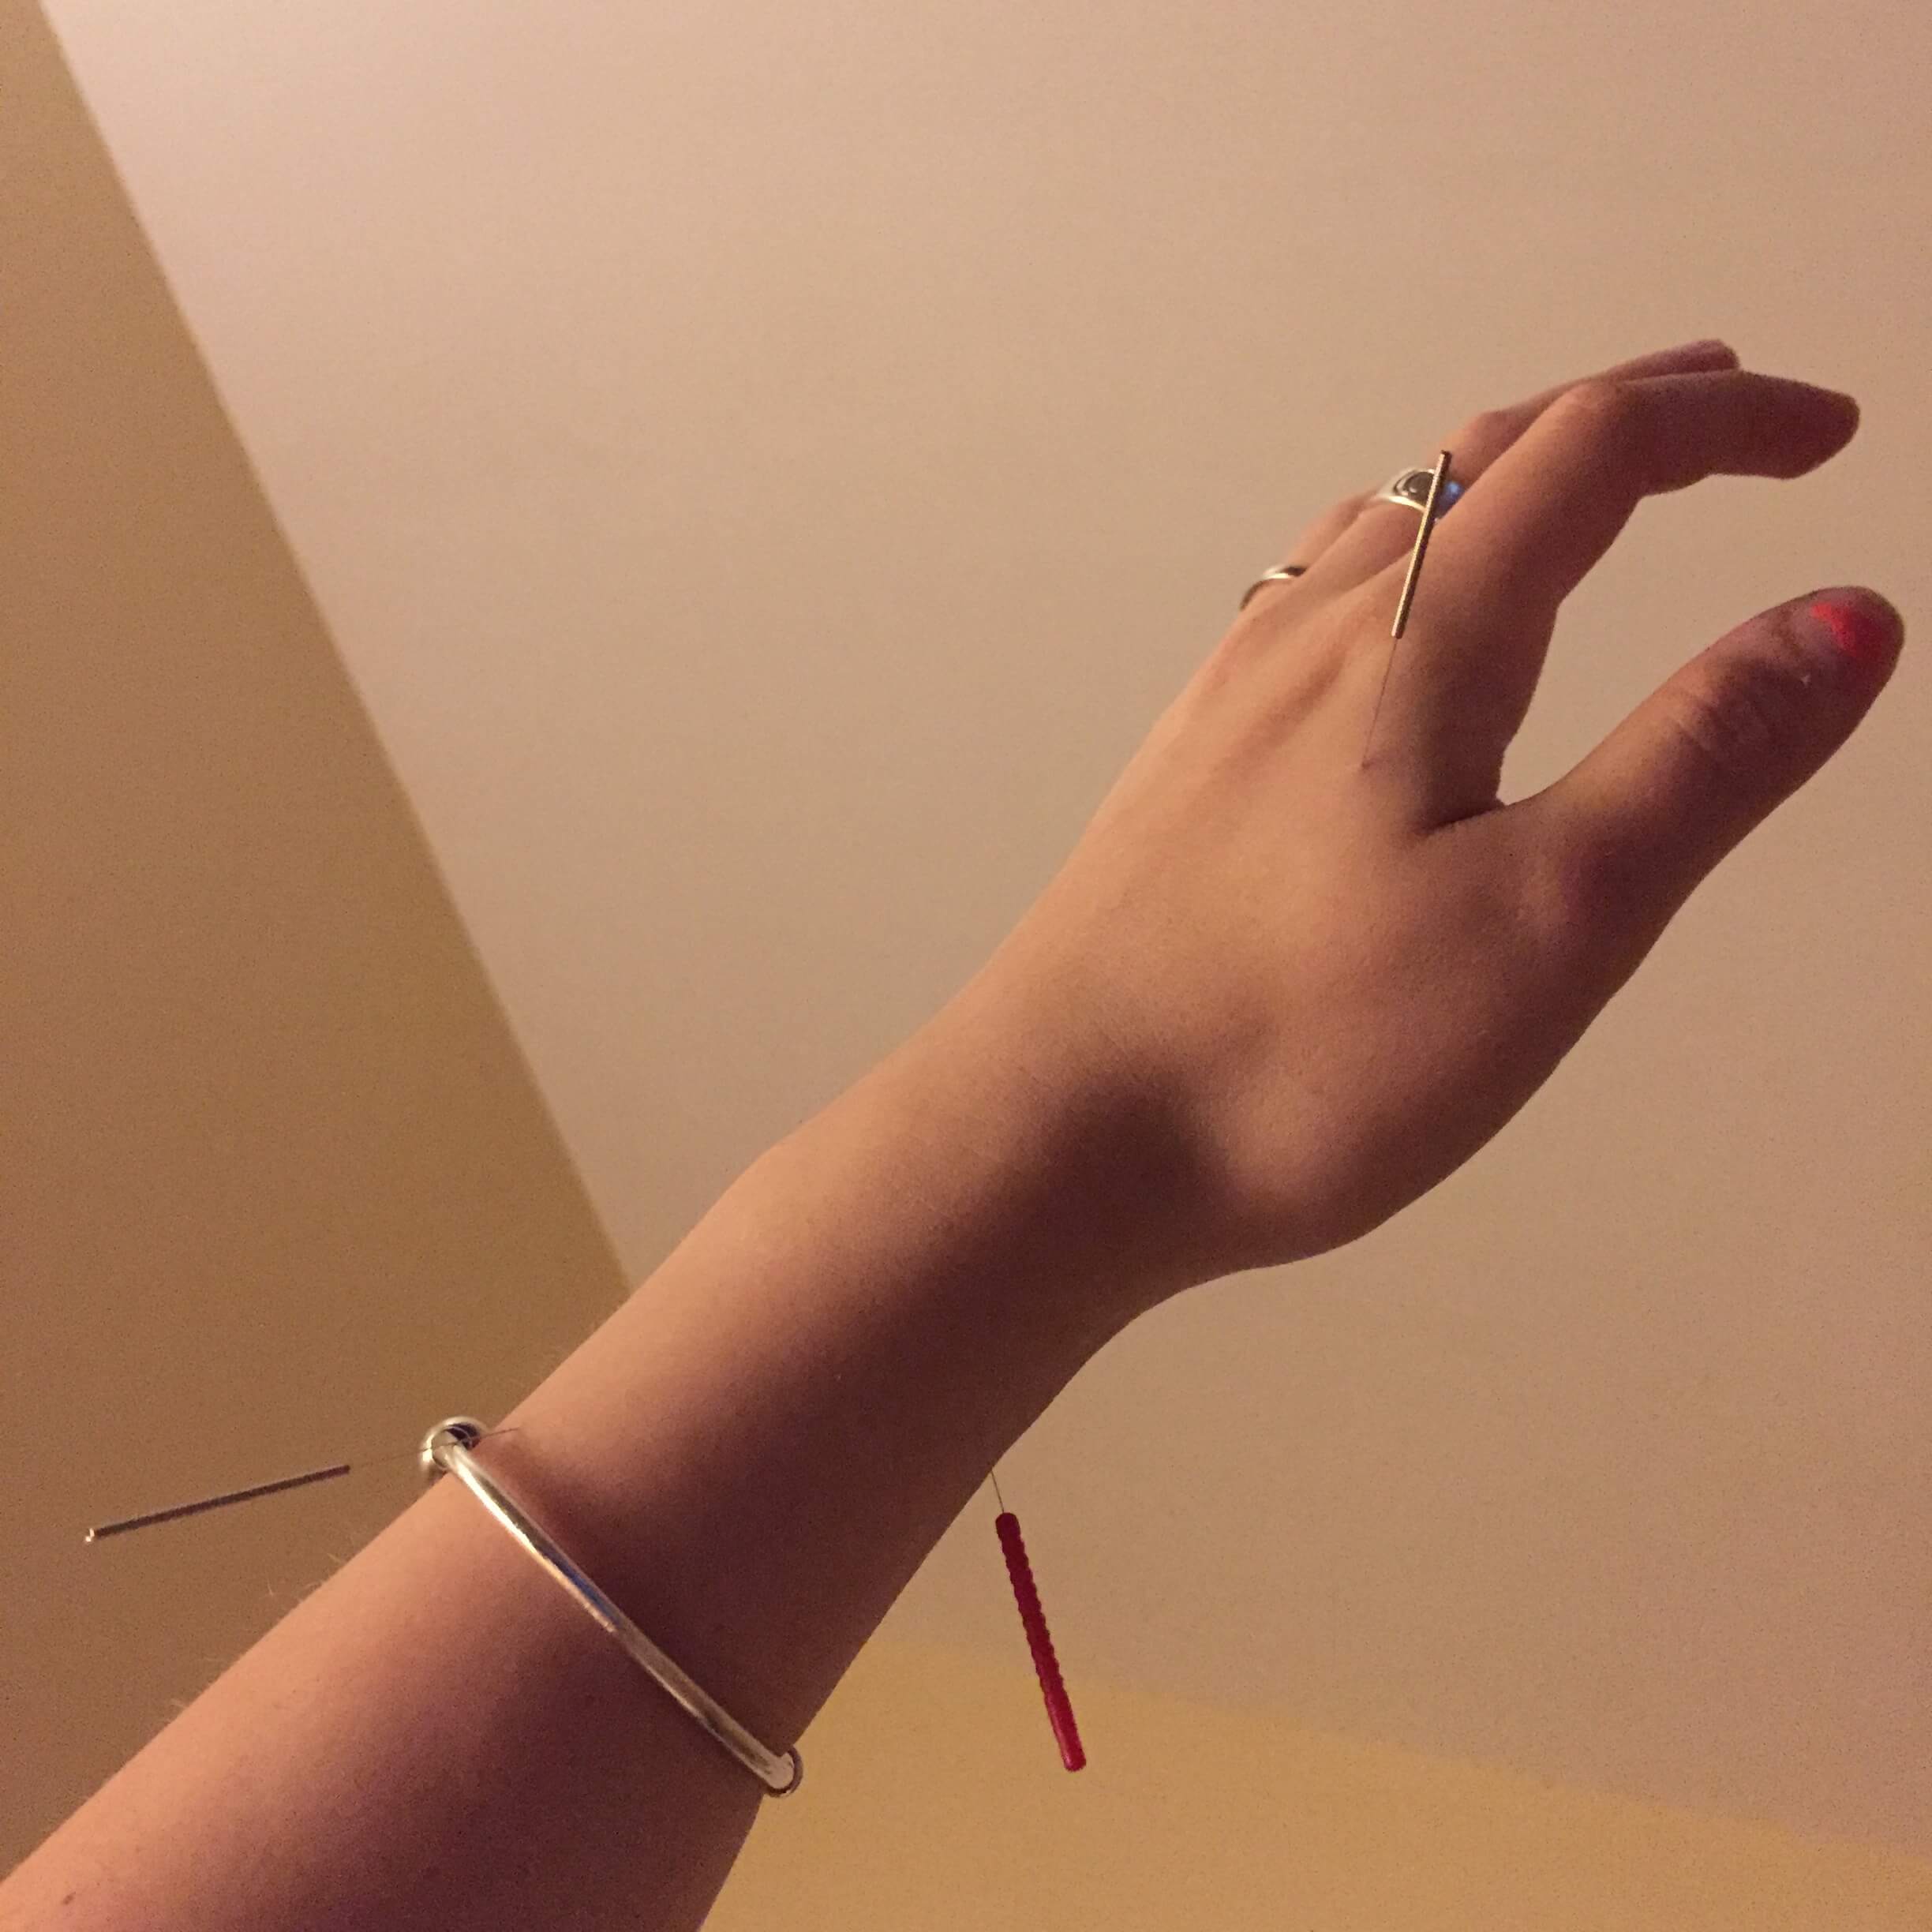 acupuncture needles in hand